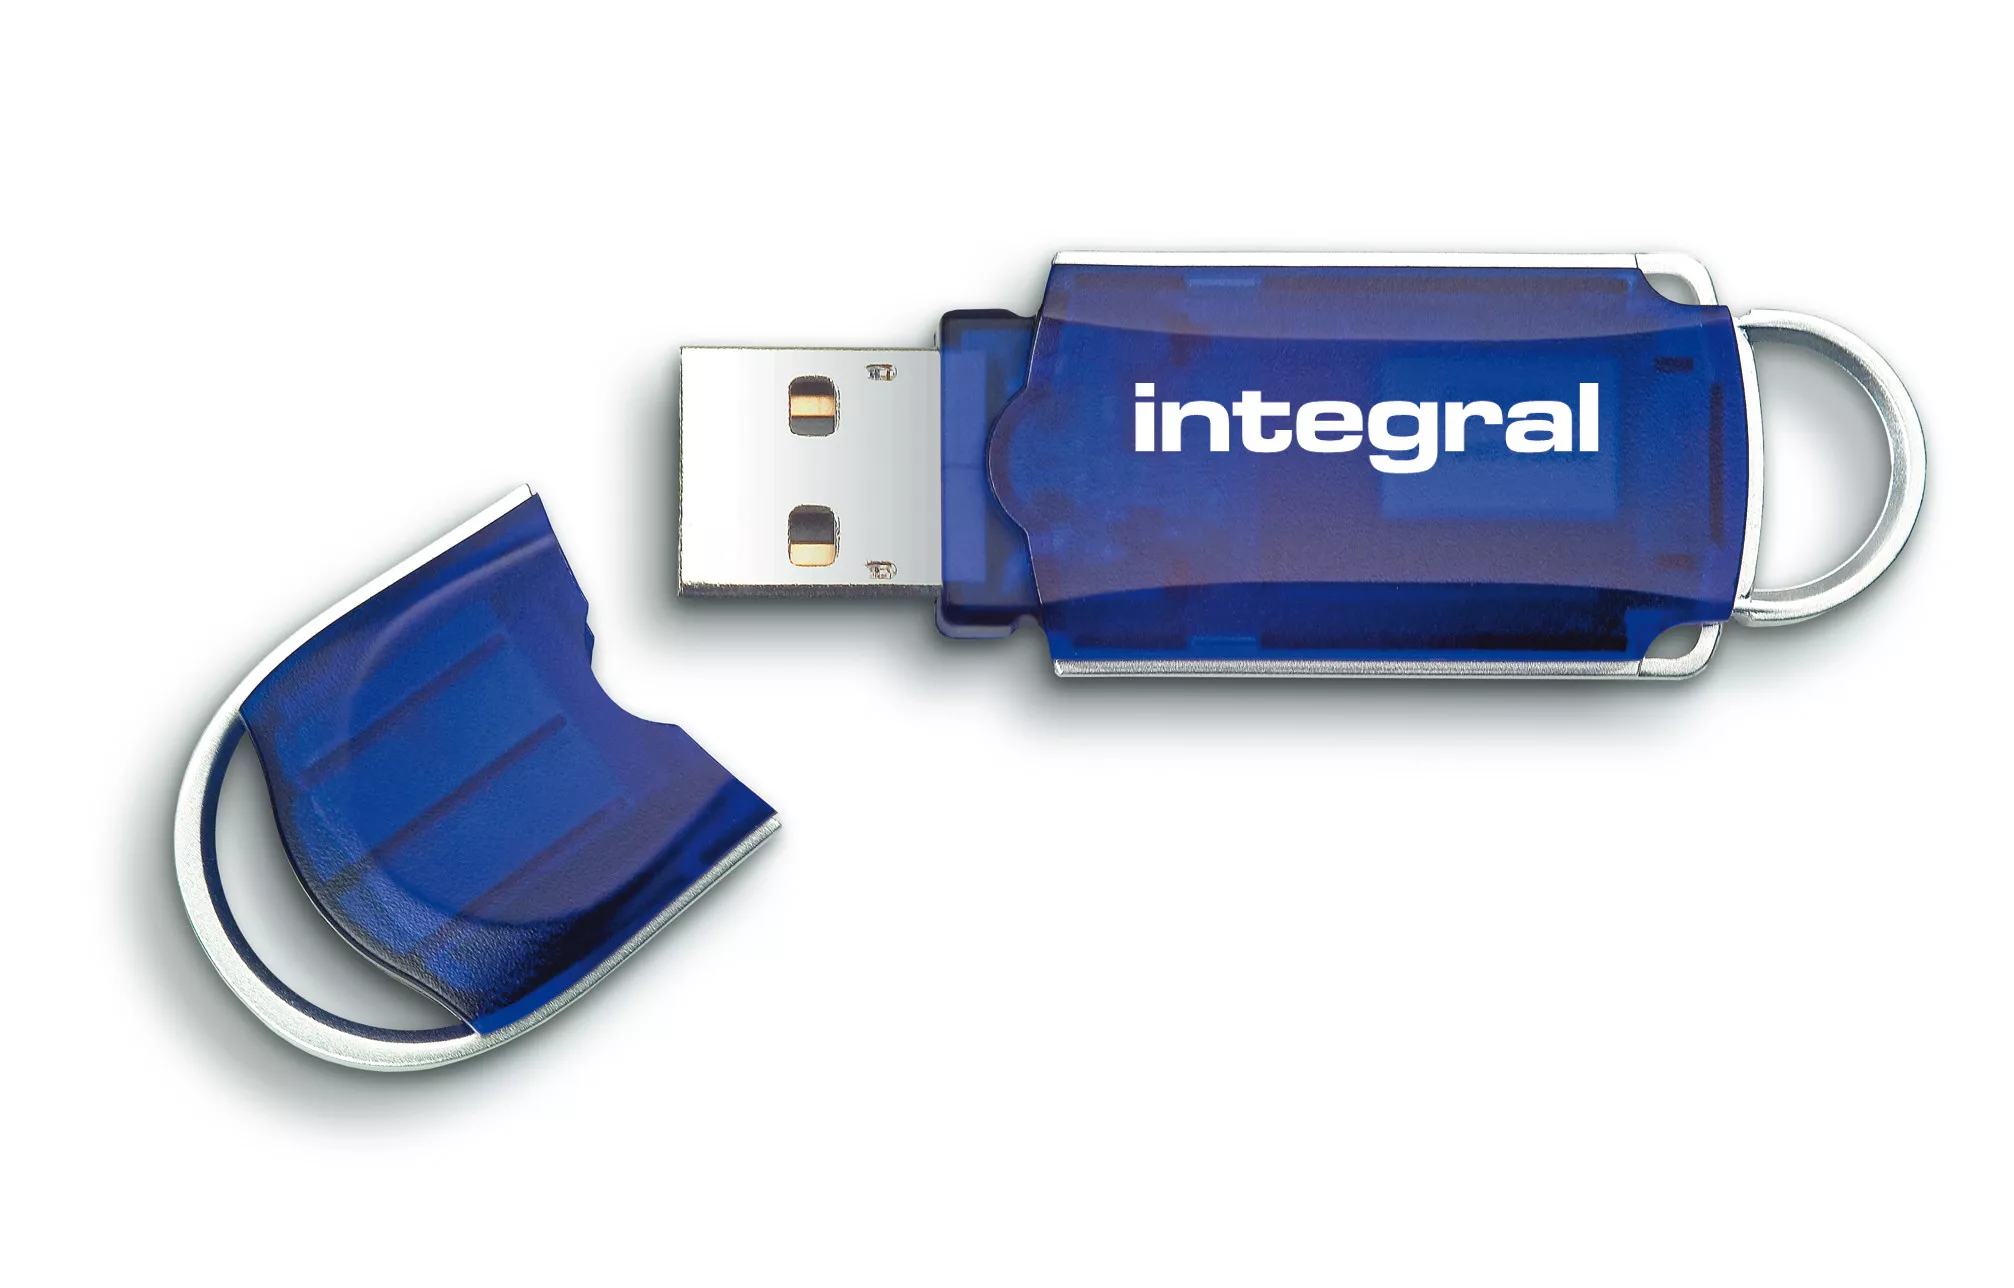 Achat Integral 256GB USB2.0 DRIVE COURIER BLUE INTEGRAL - 5055288442108